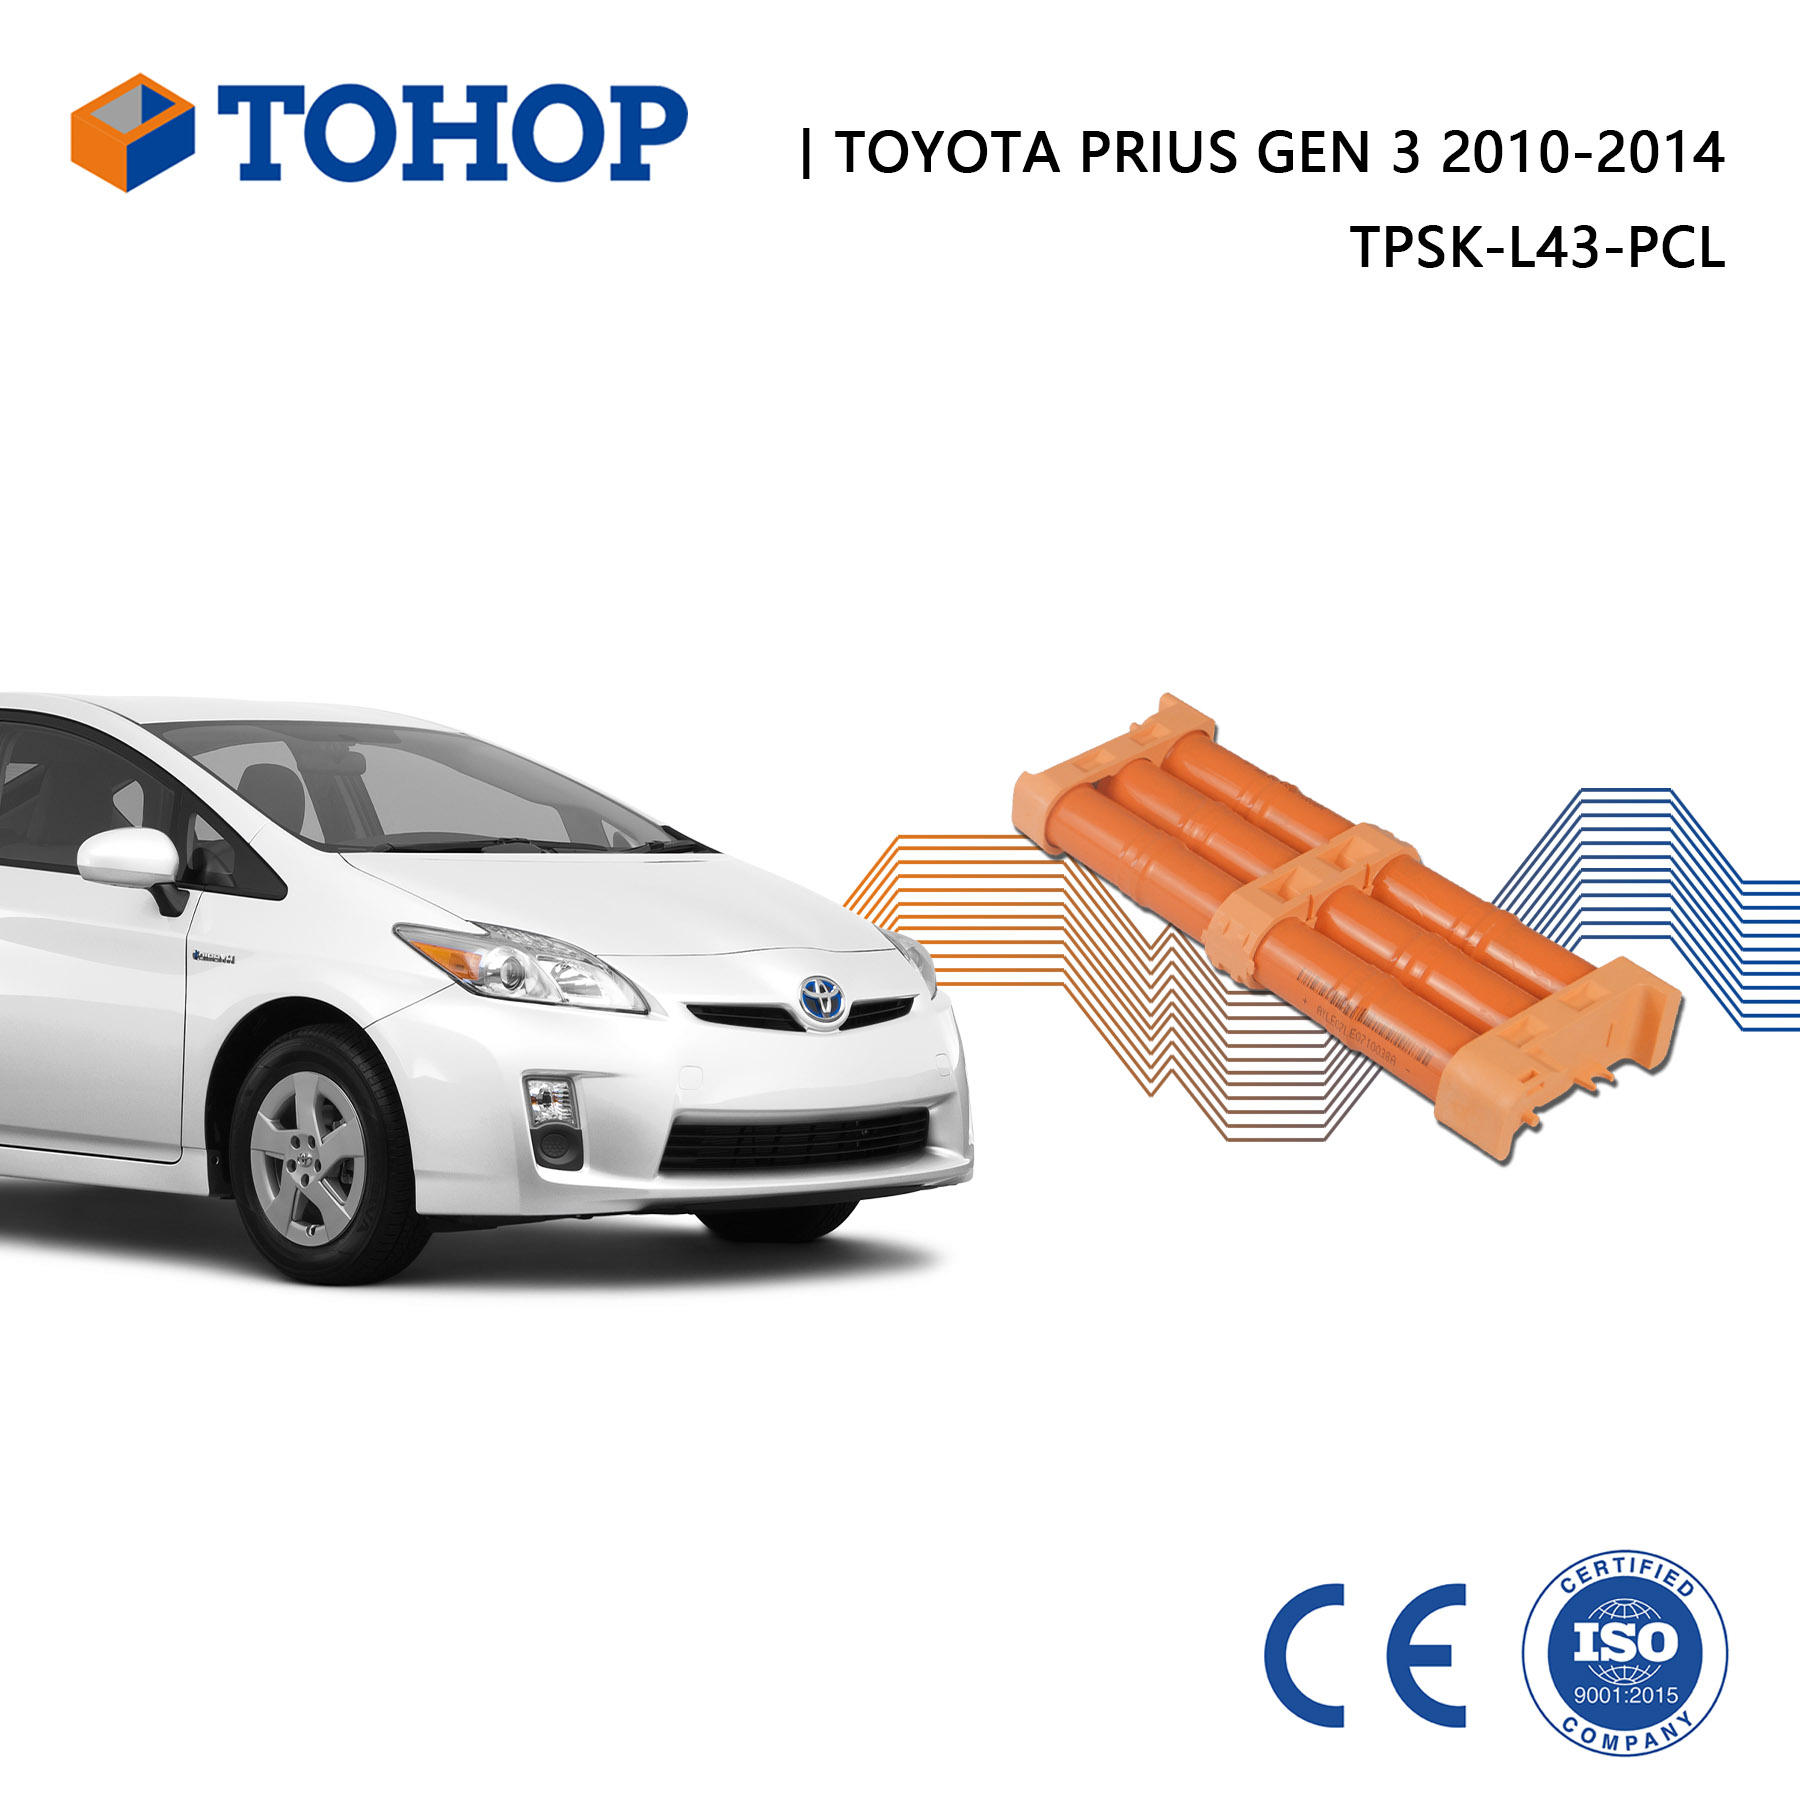 201.6V/6.5Ah Good Quality Replacement Hybrid Car Battery For Toyota Prius